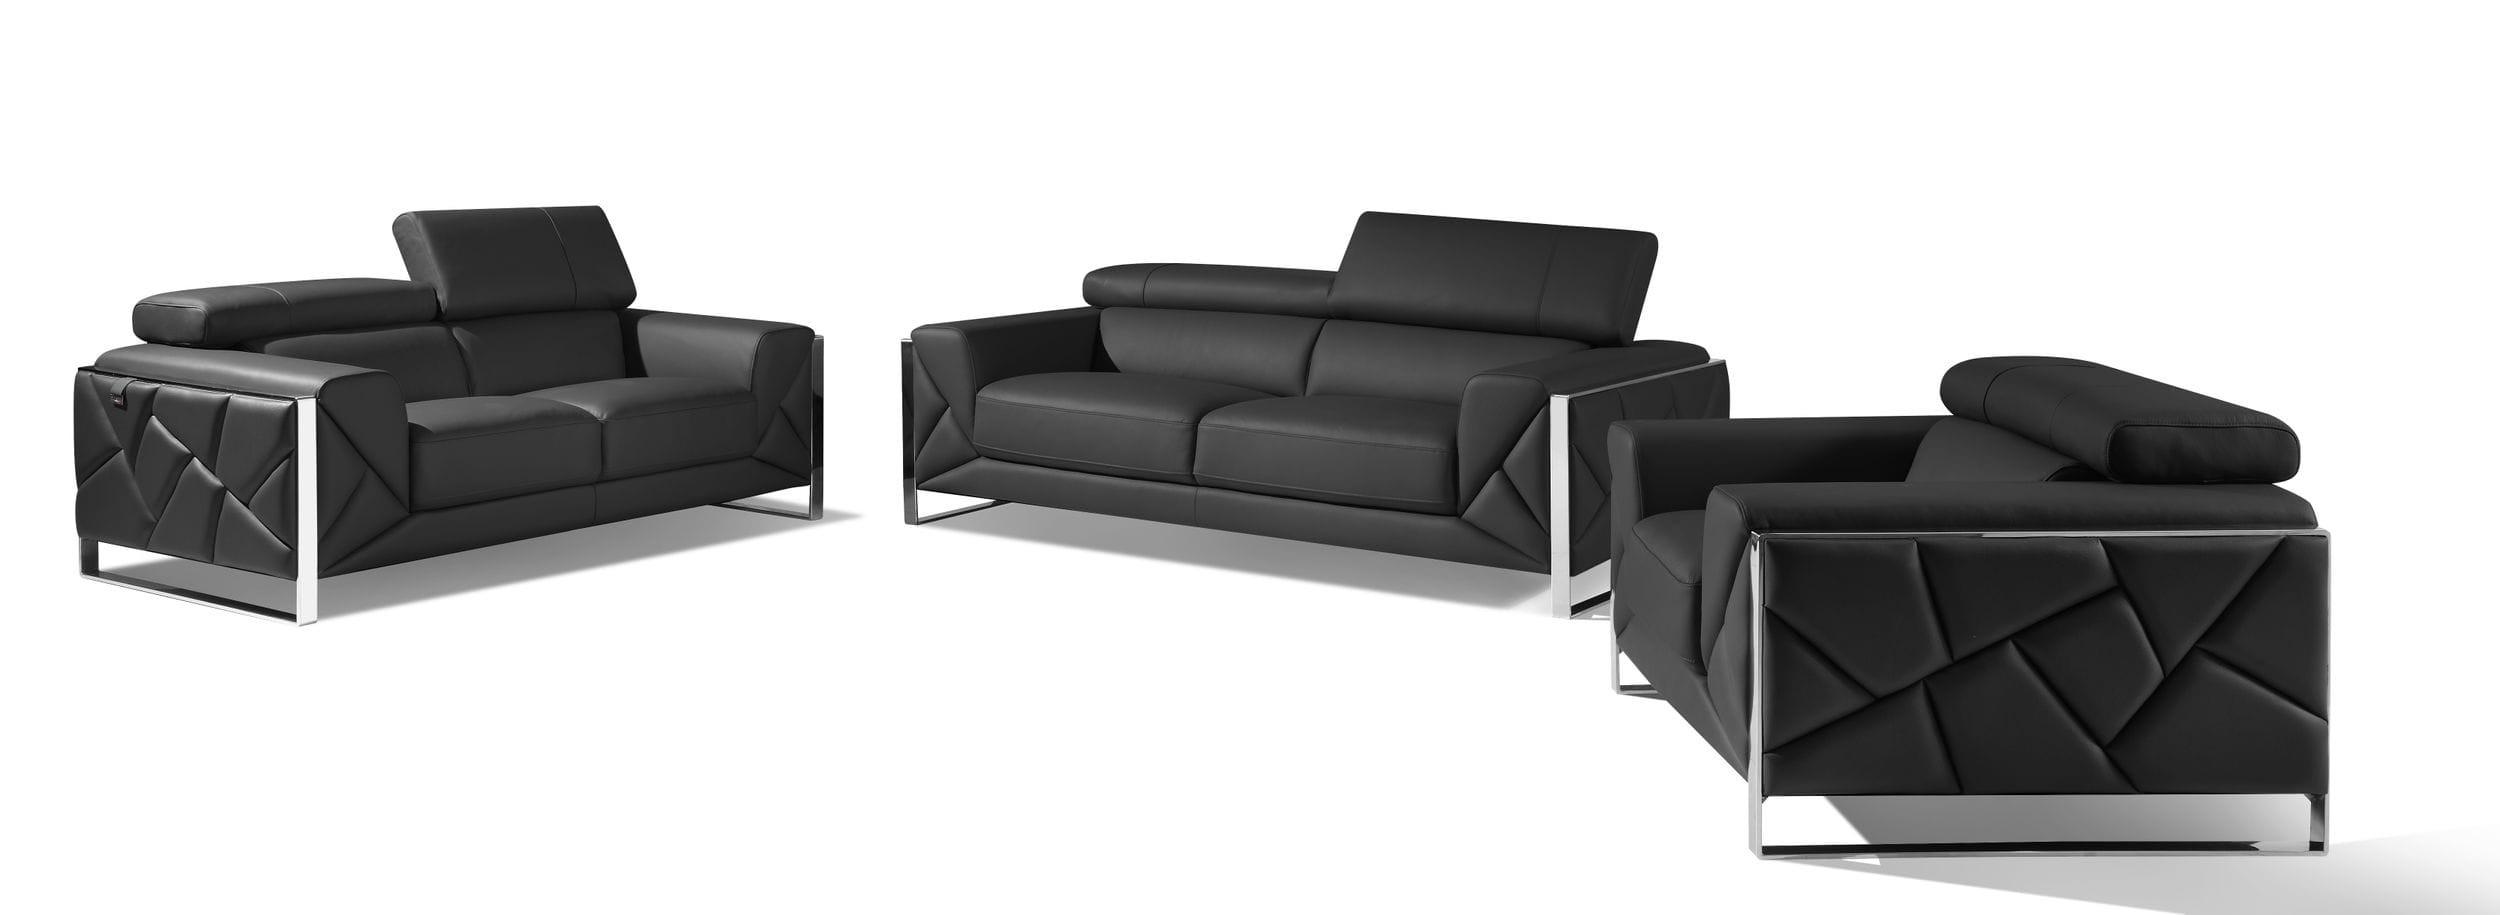 Global United 903 Sofa Loveseat and Chair Set